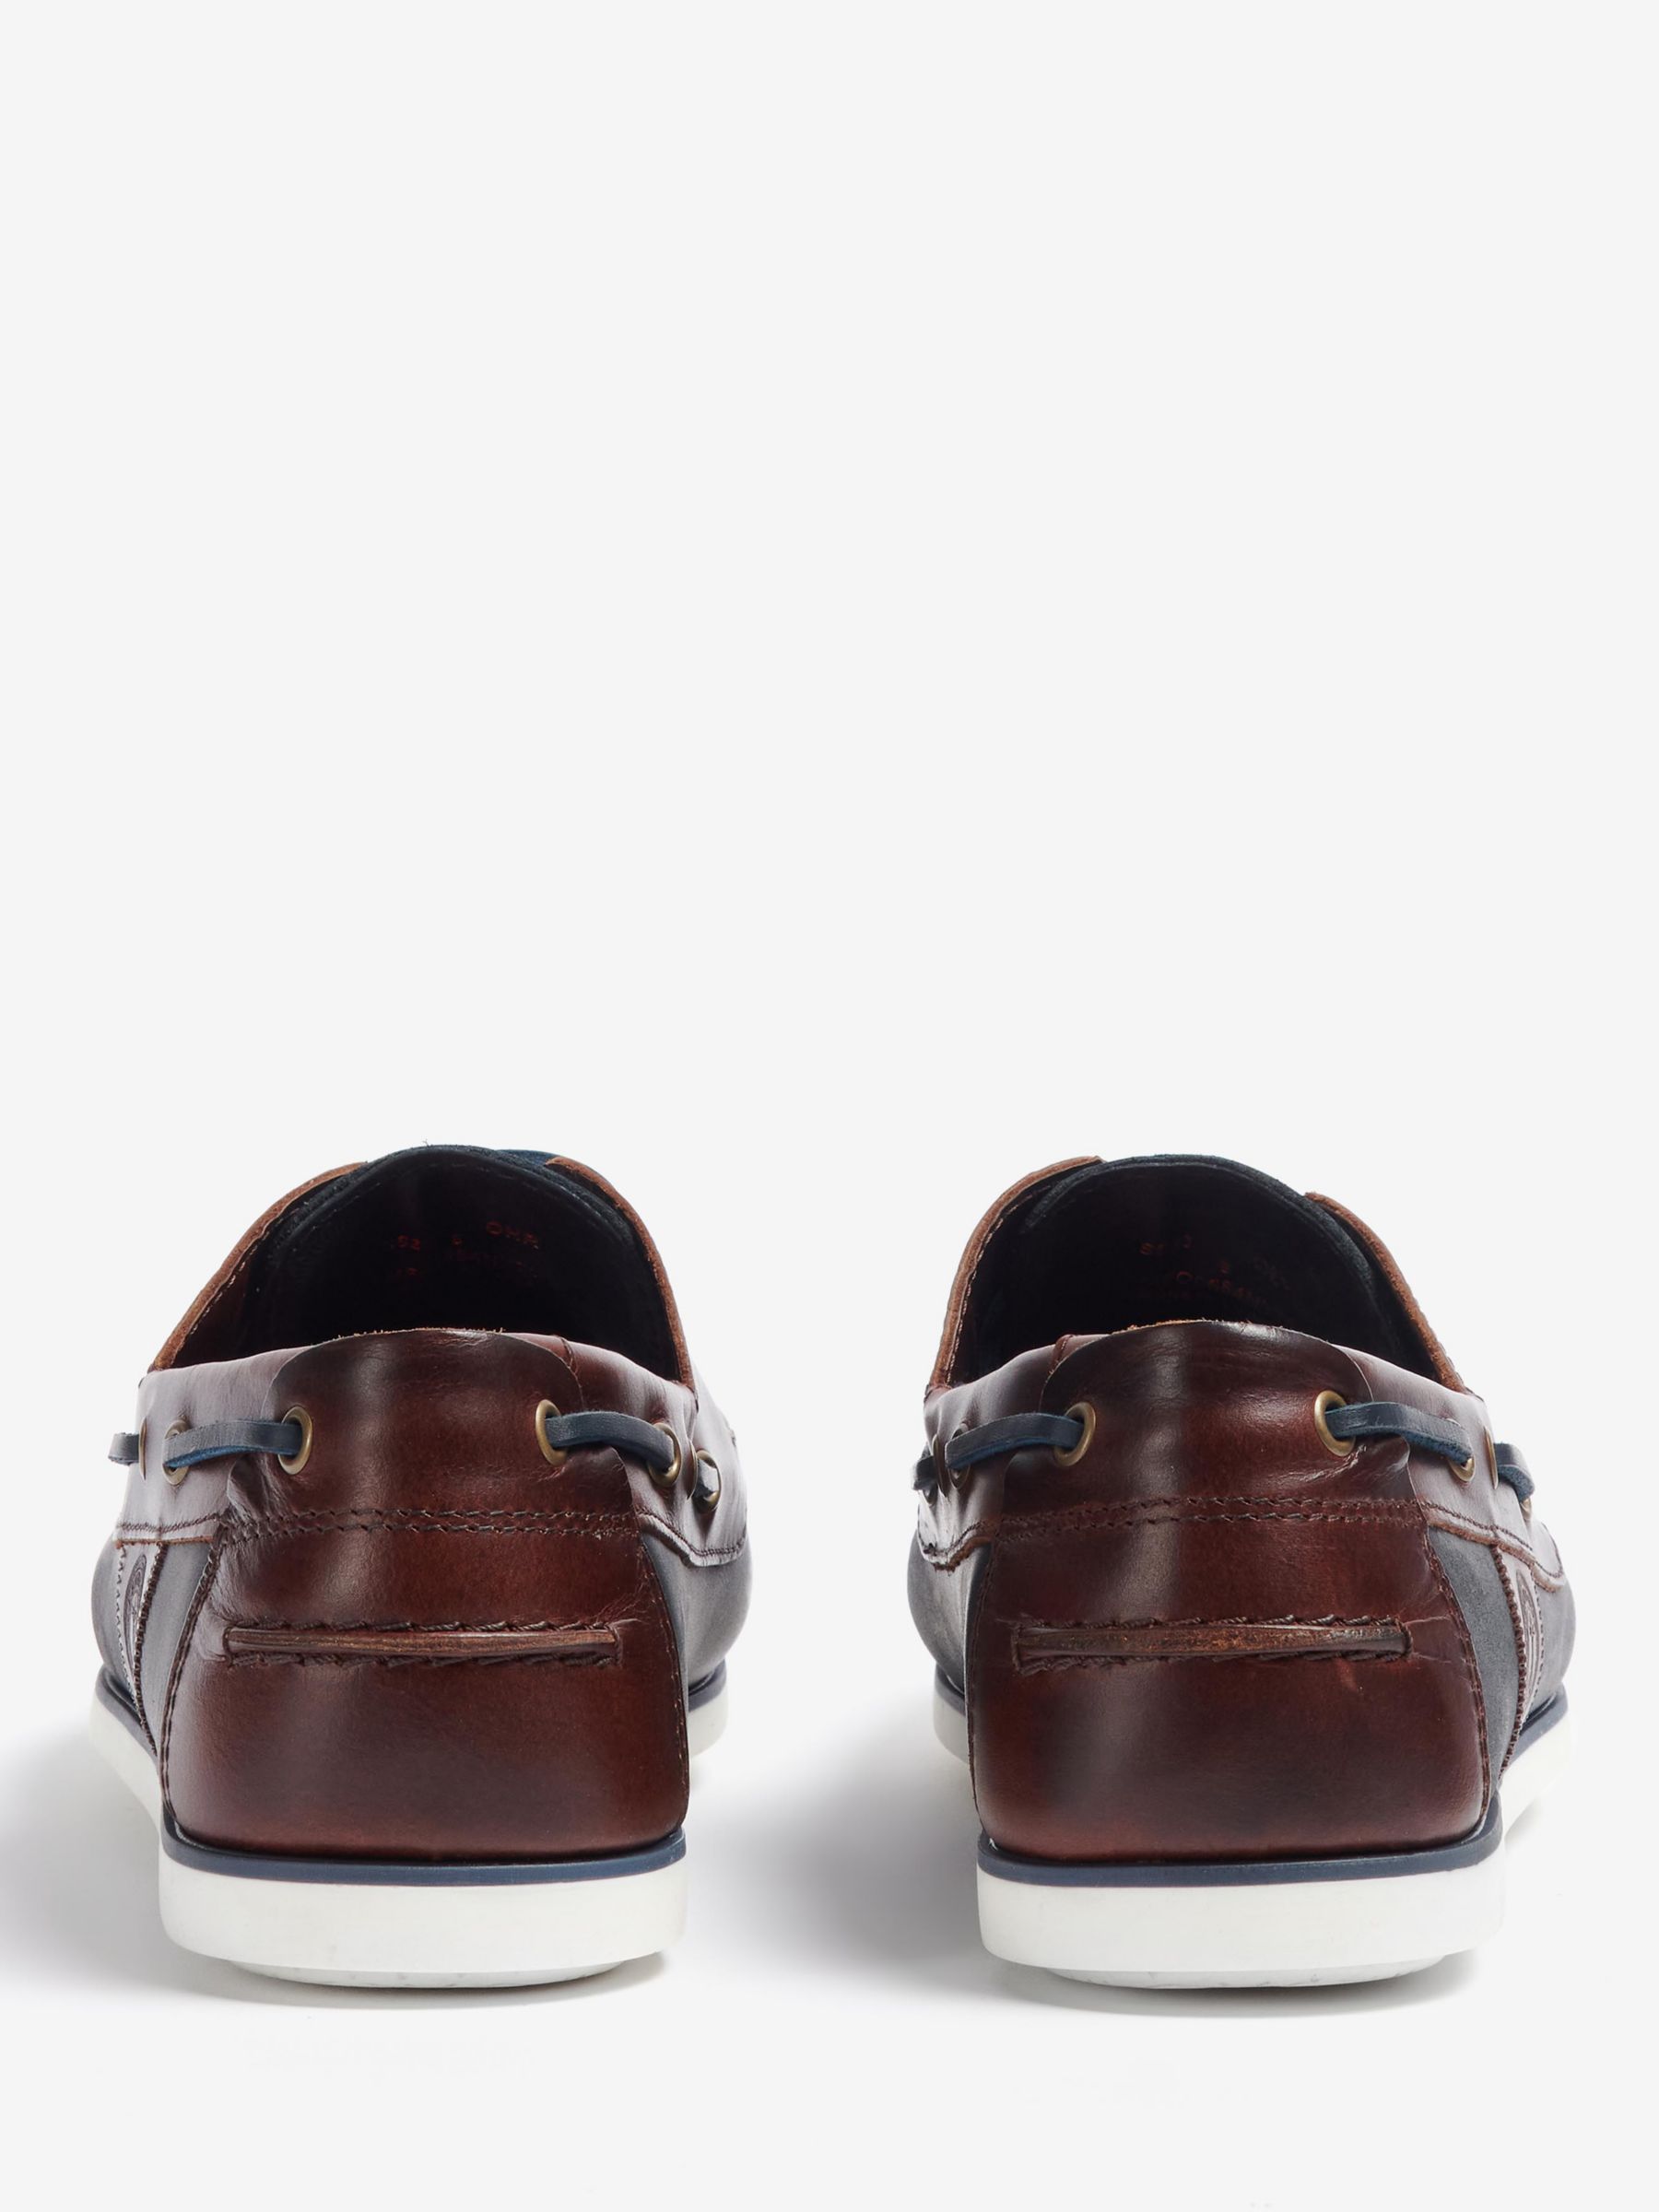 Barbour Wake Leather Boat Shoes, Navy at John Lewis & Partners